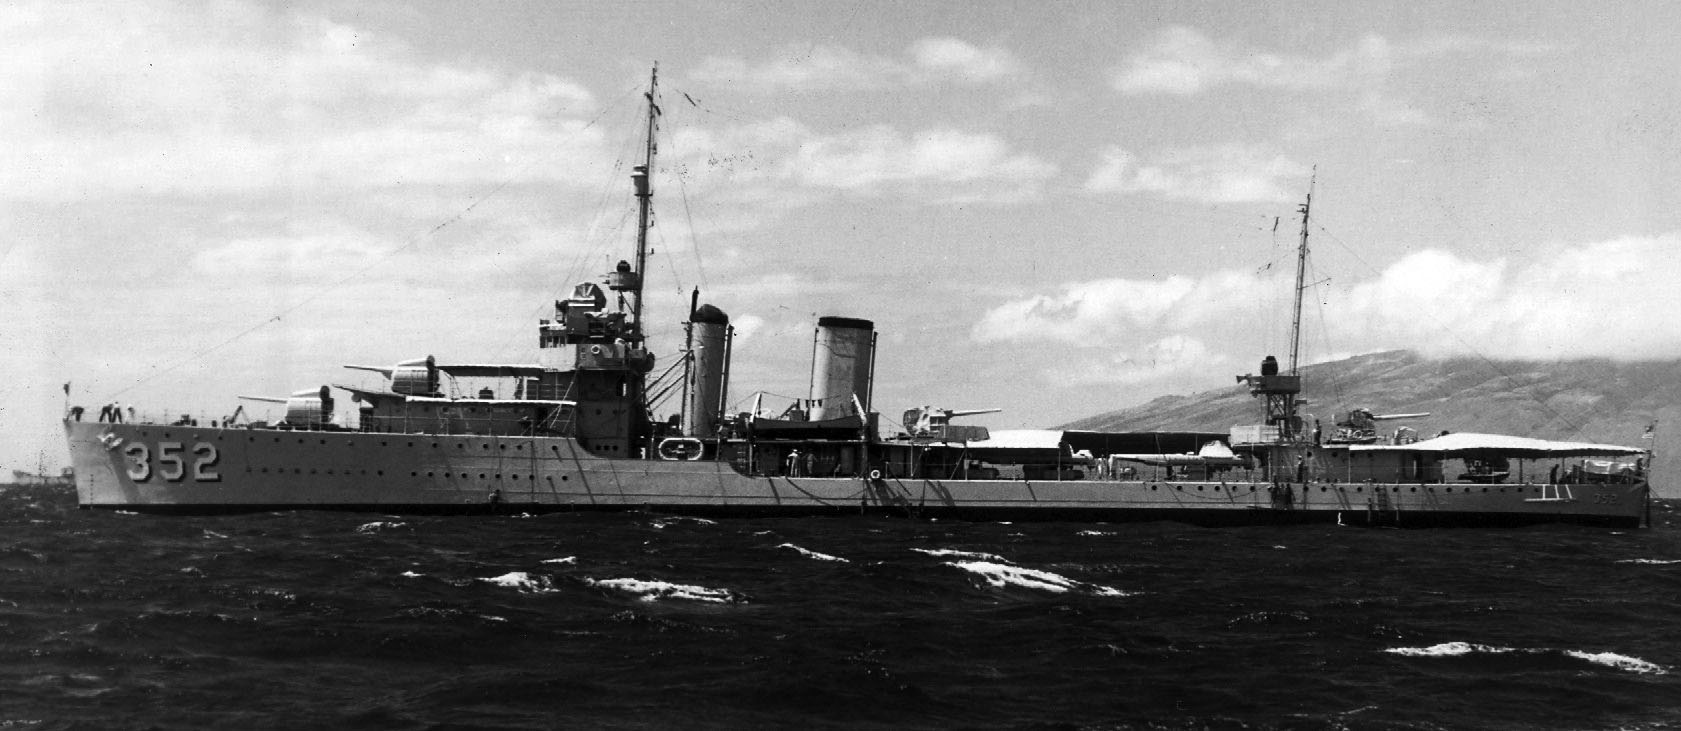 Possibly off Hawaii, late 1930s